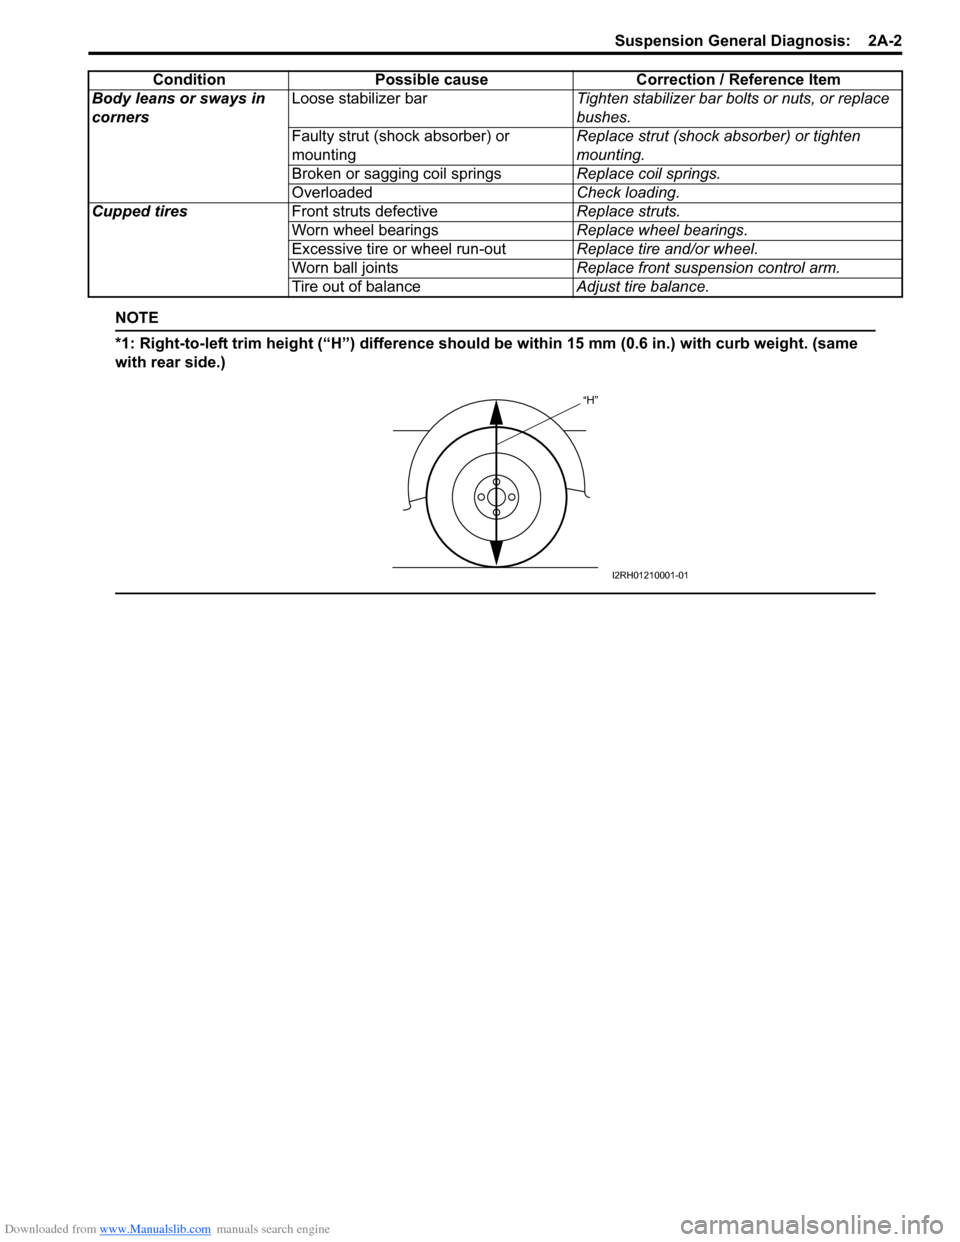 SUZUKI SWIFT 2005 2.G Service Service Manual Downloaded from www.Manualslib.com manuals search engine Suspension General Diagnosis:  2A-2
NOTE
*1: Right-to-left trim height (“H”) difference should be within 15 mm (0.6 in.) with curb weight. 